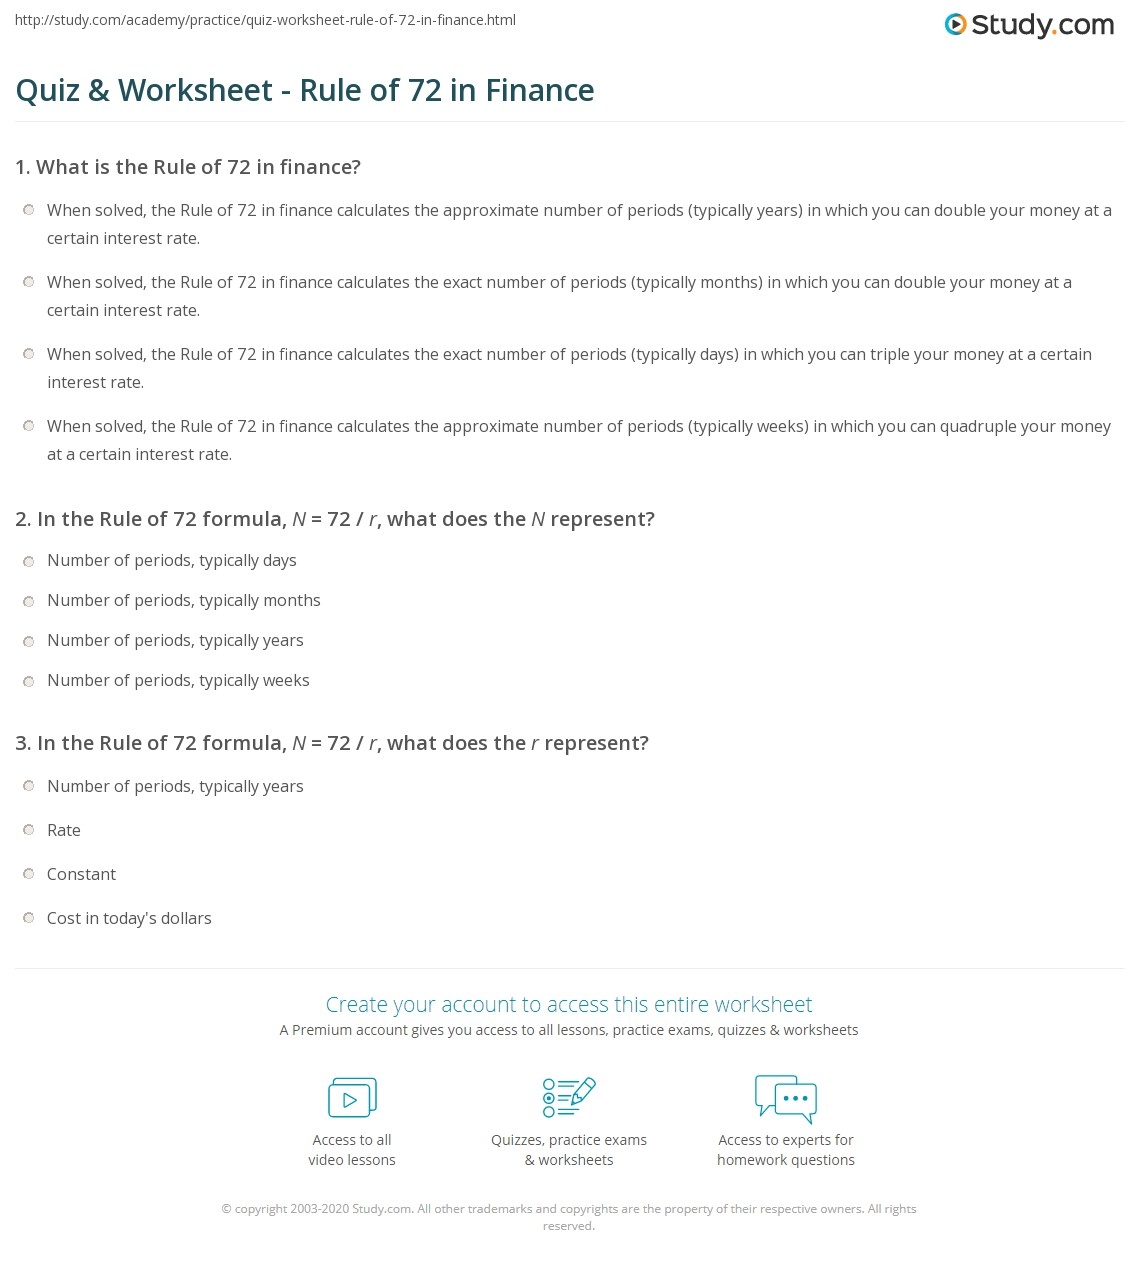 quiz-worksheet-rule-of-72-in-finance-study-math-worksheet-answers